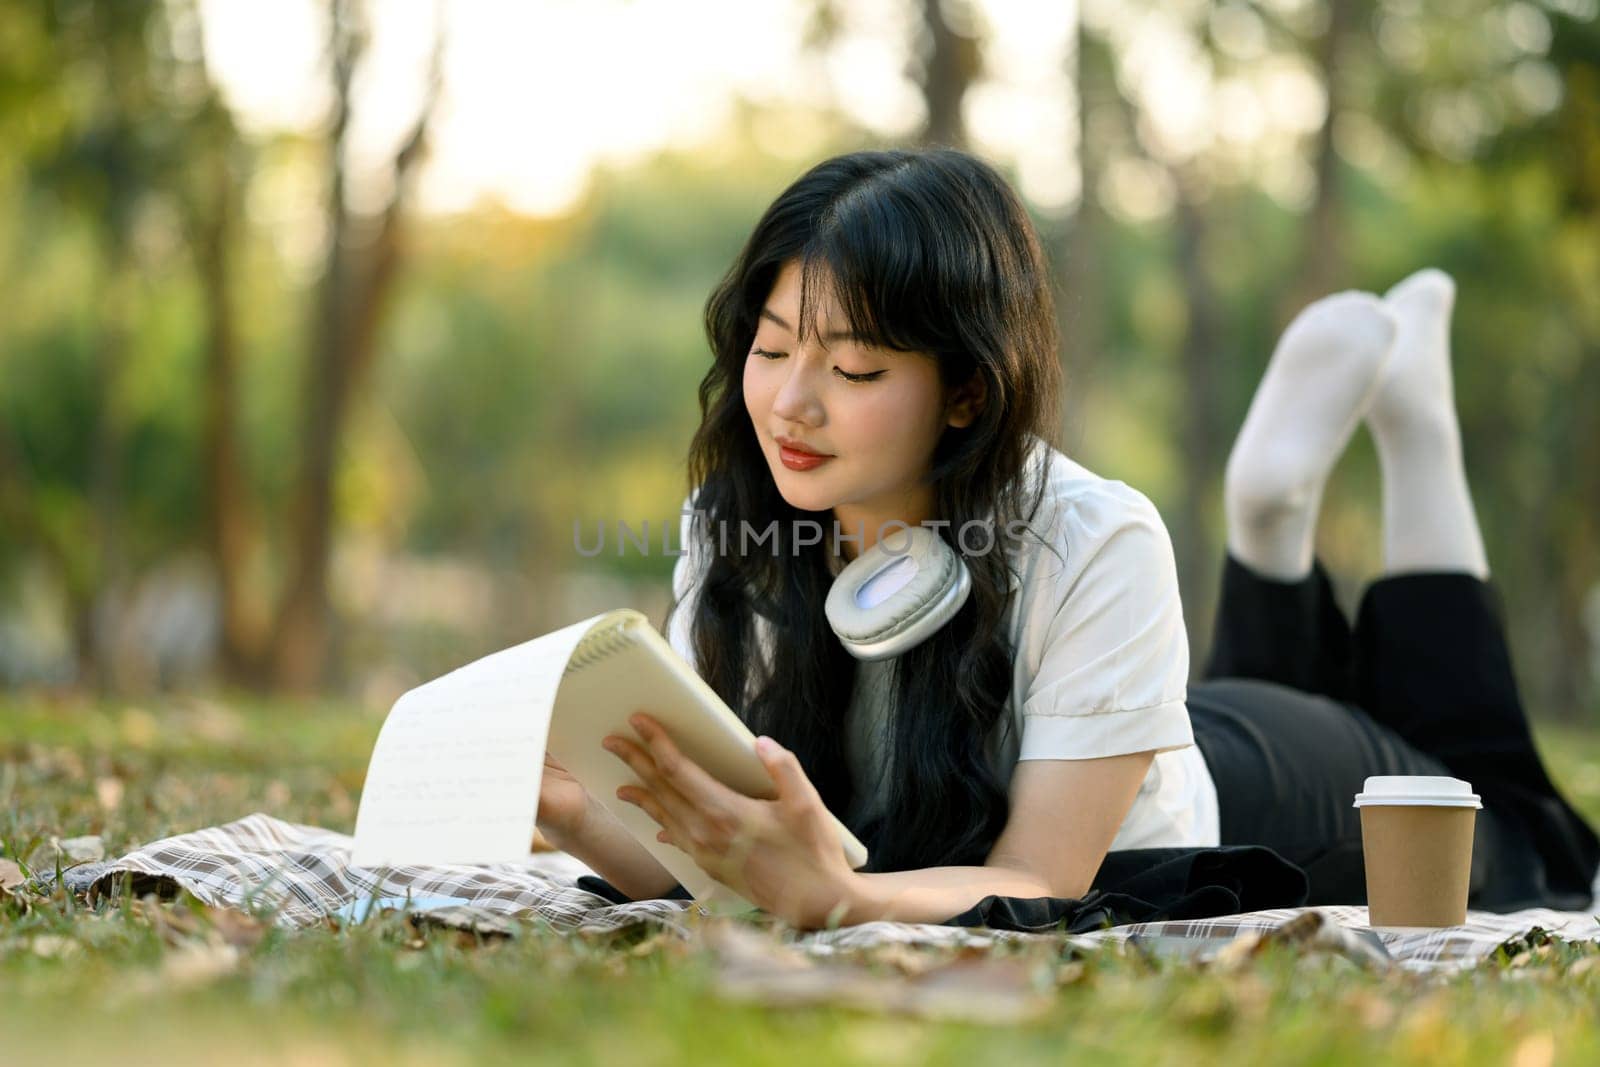 Peaceful young woman relaxing on green grass and reading book by prathanchorruangsak